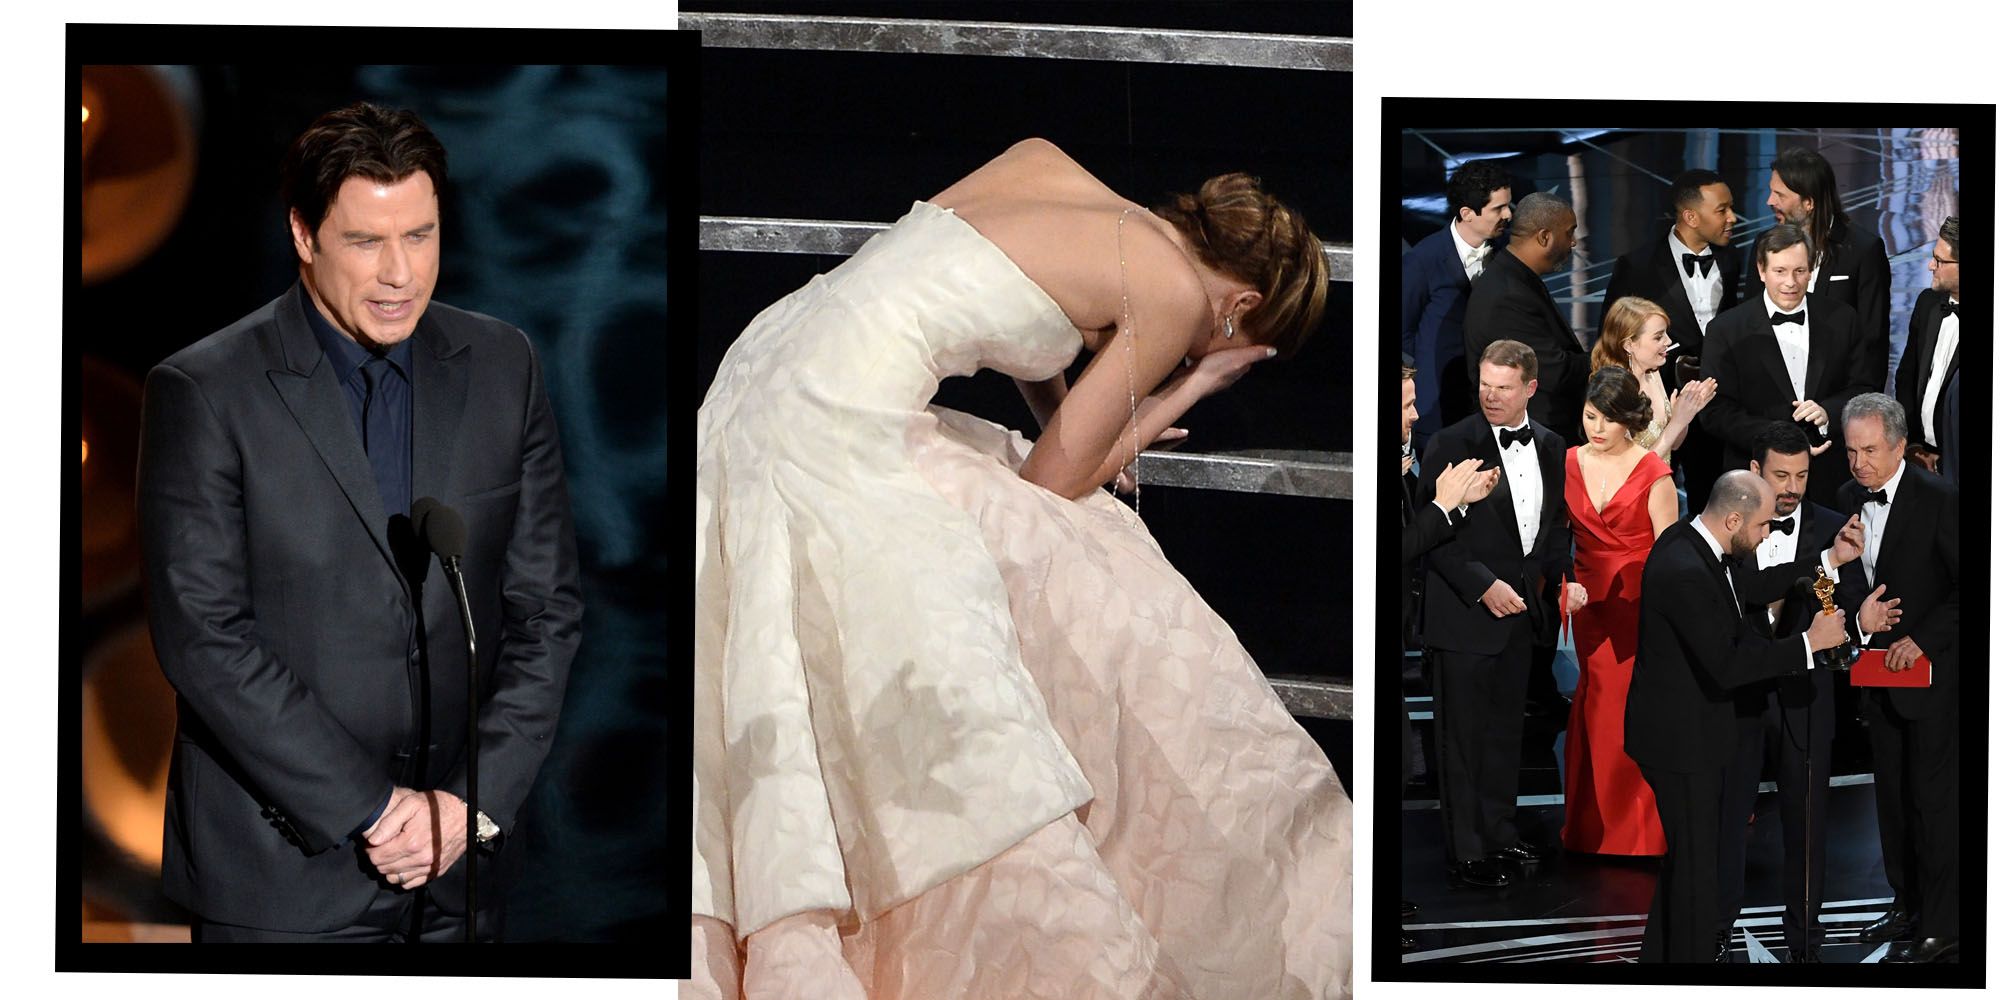 19 Most Awkward Oscar Moments Ever - Top Cringey Moments